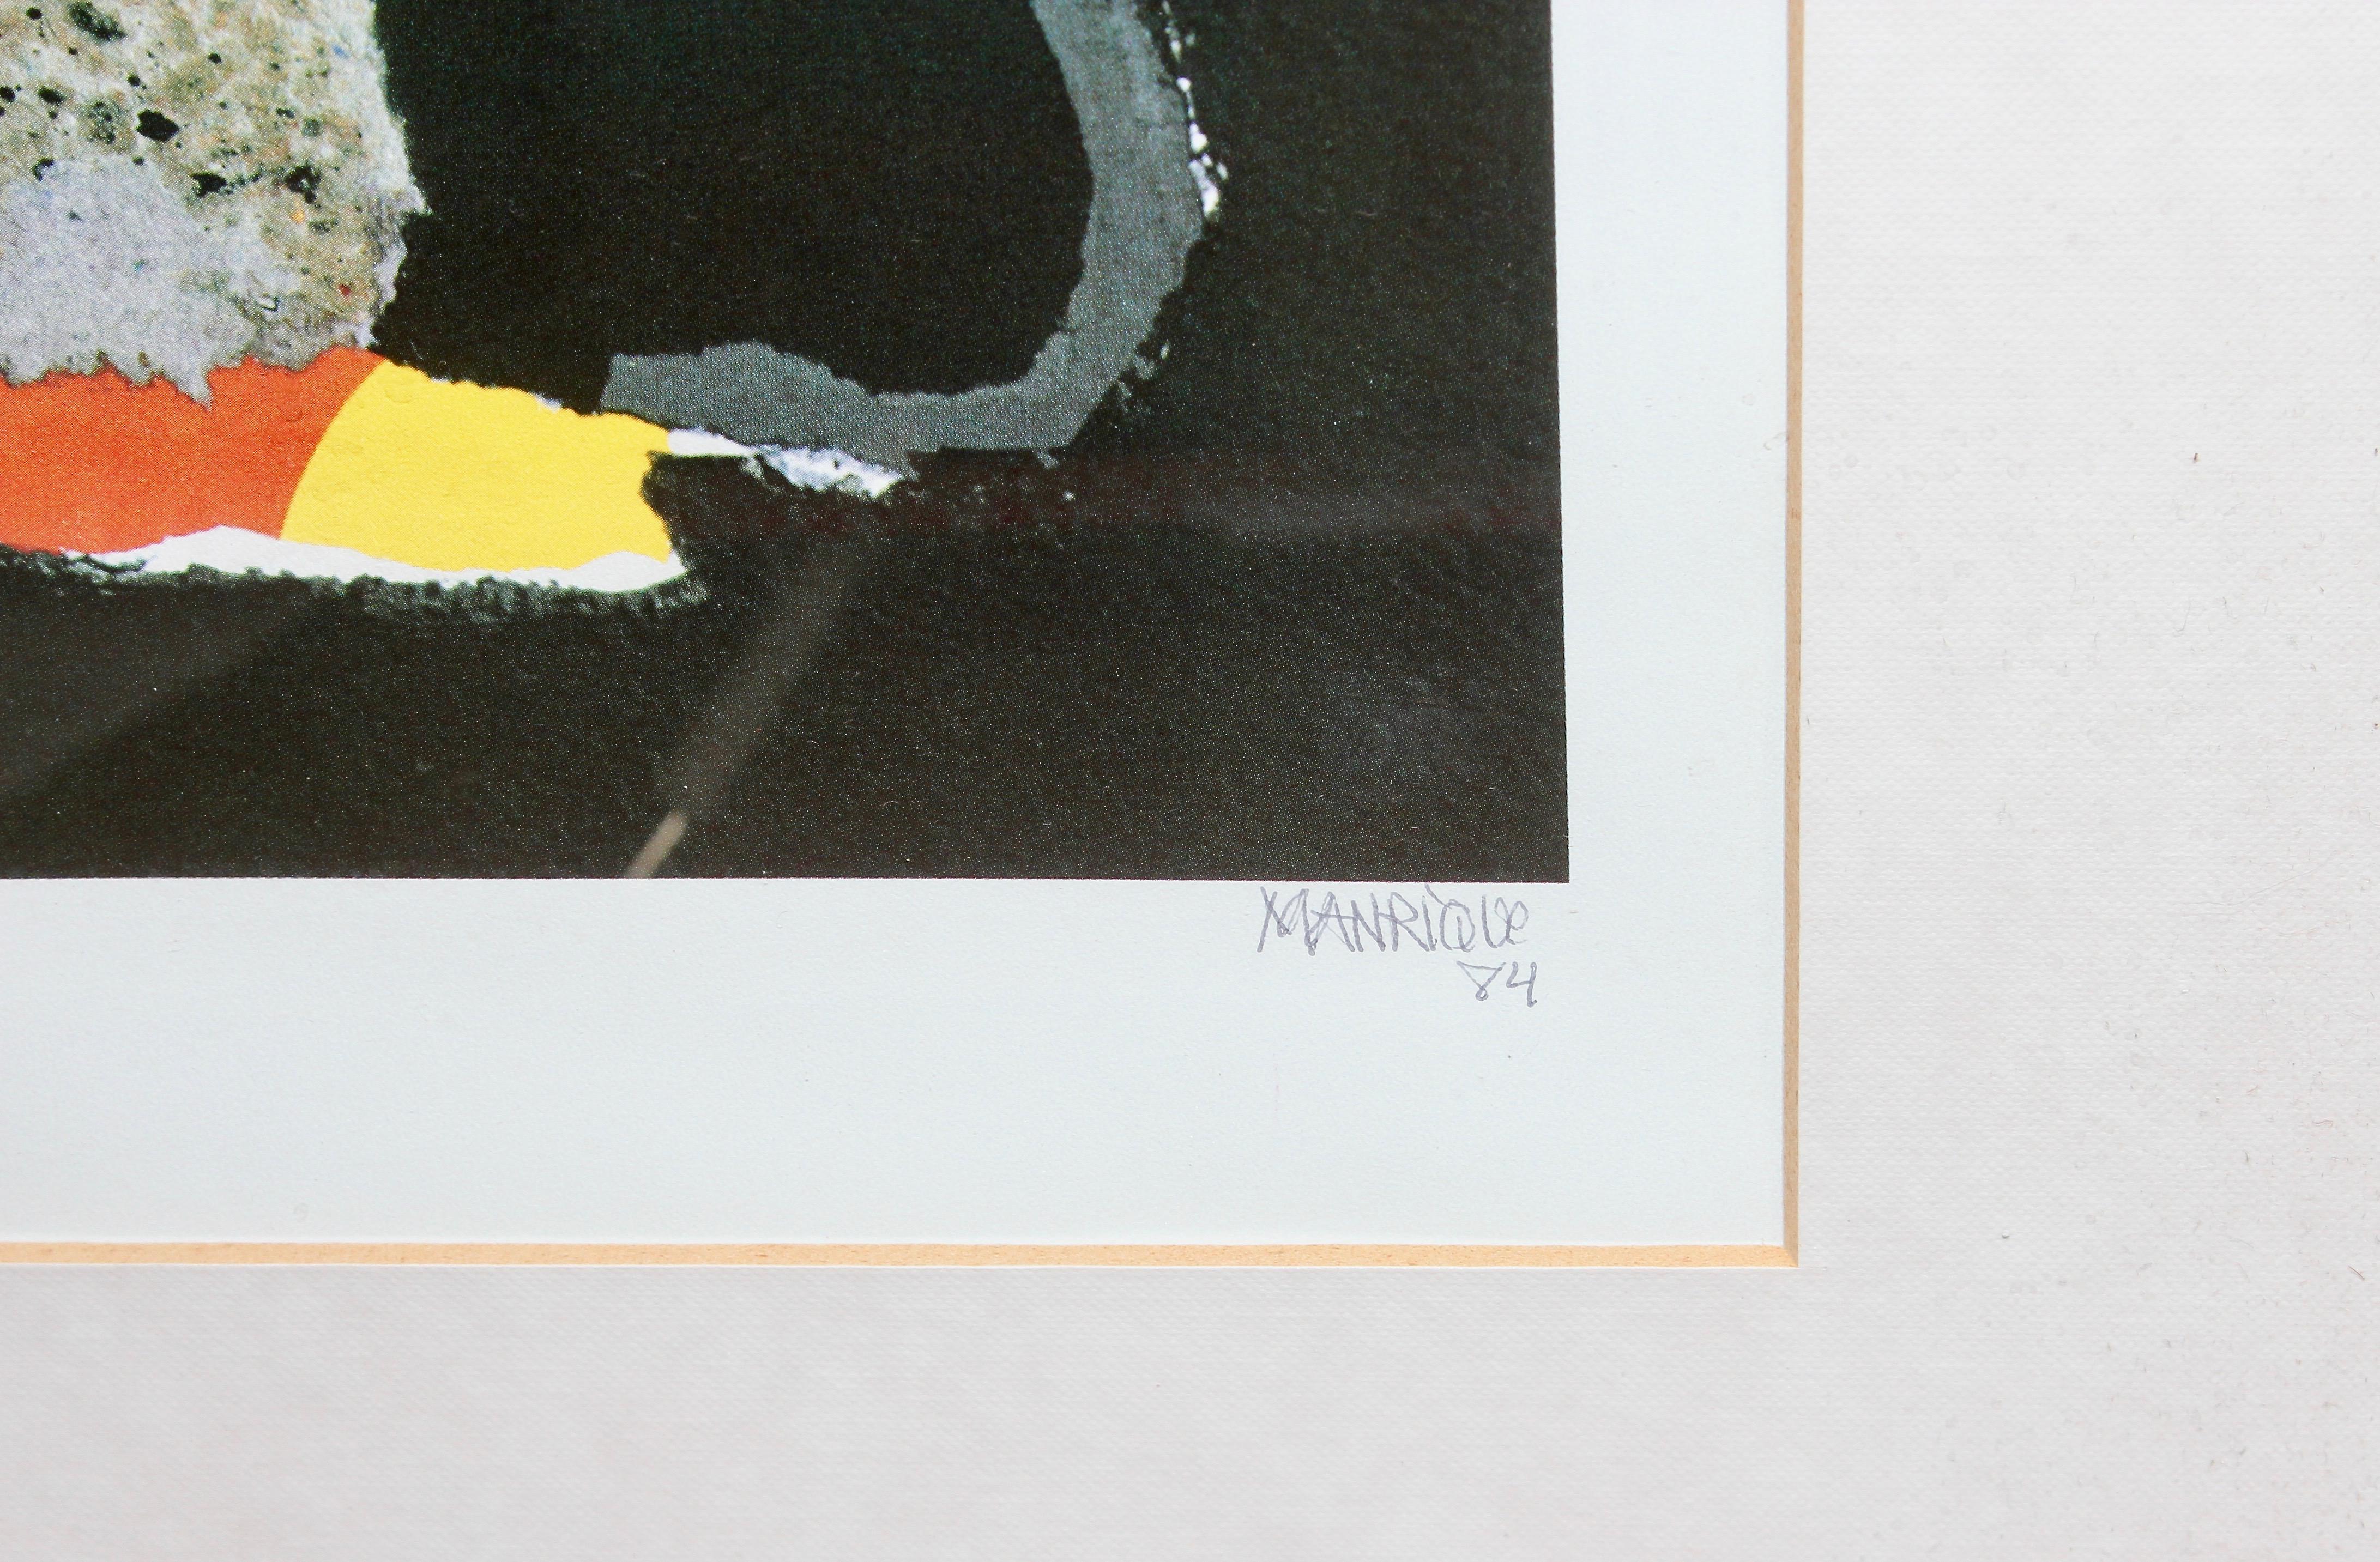 Decorative, abstract lithograph, signed and numbered, 67/90 MANRIQUE

Dimensions with frame.